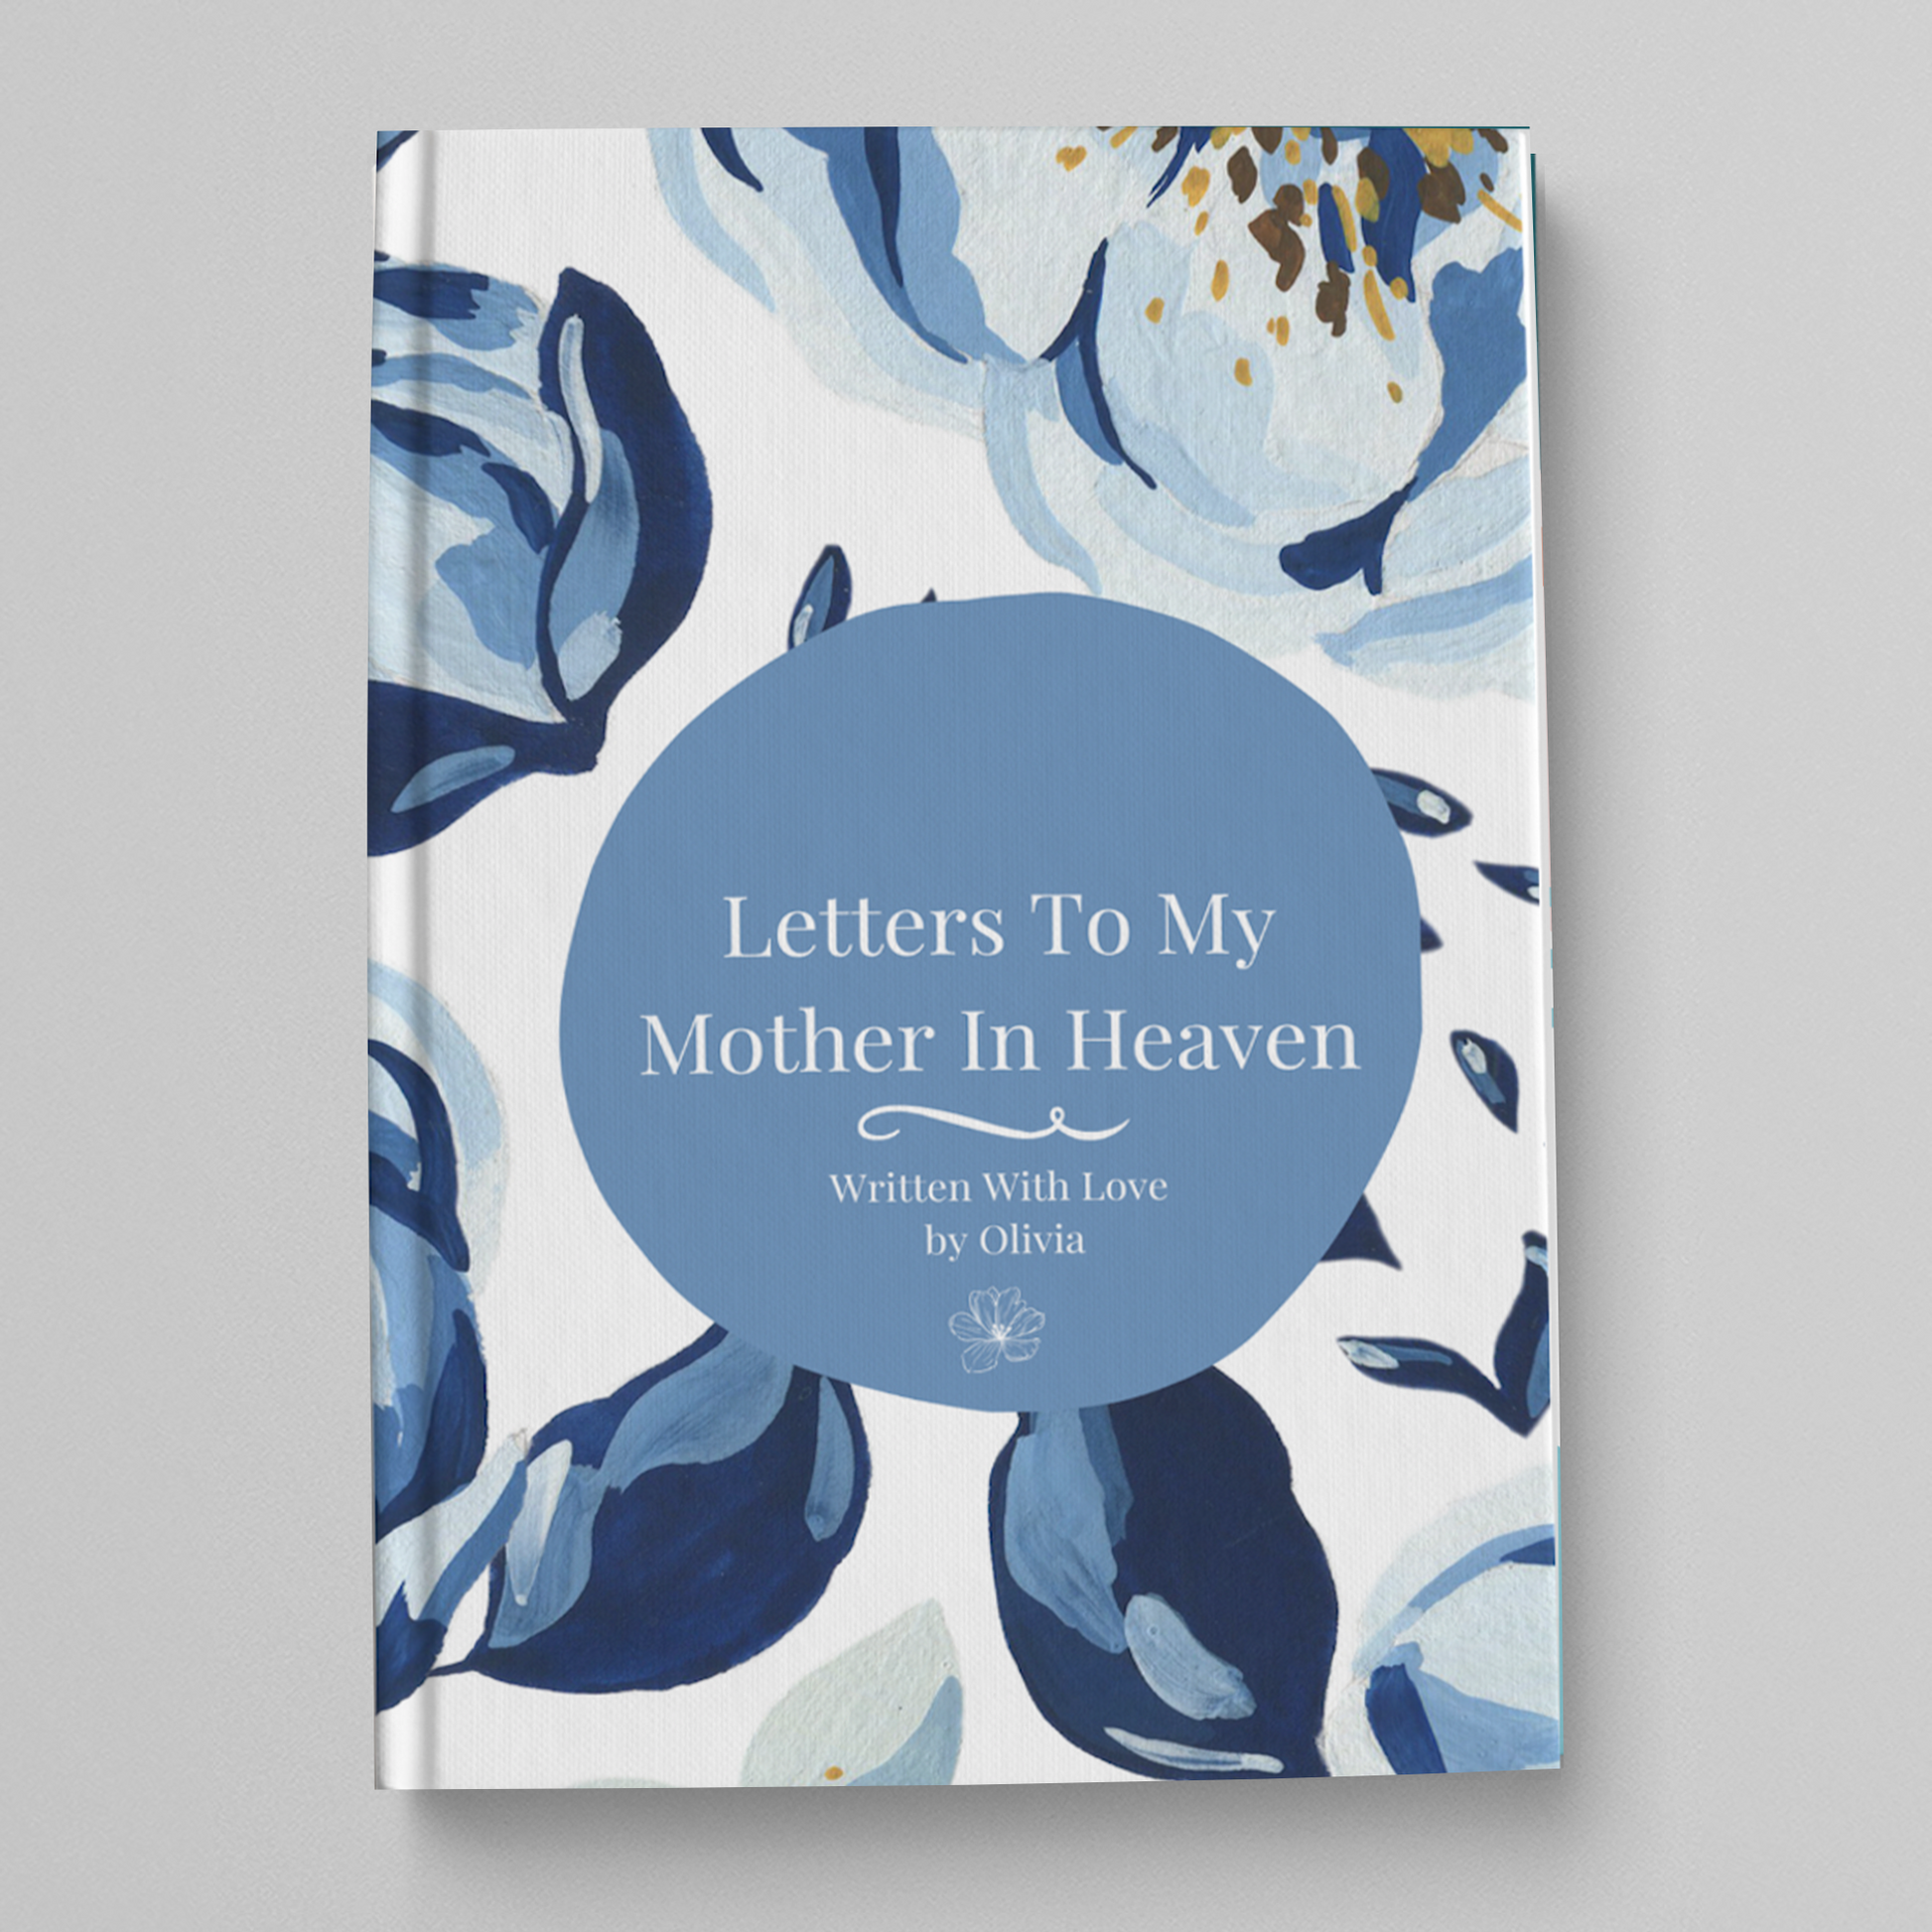 Letters To My Mother In Heaven Book. Grief Journal For Loss Of Mother. Sympathy Gift. Luhvee Books.